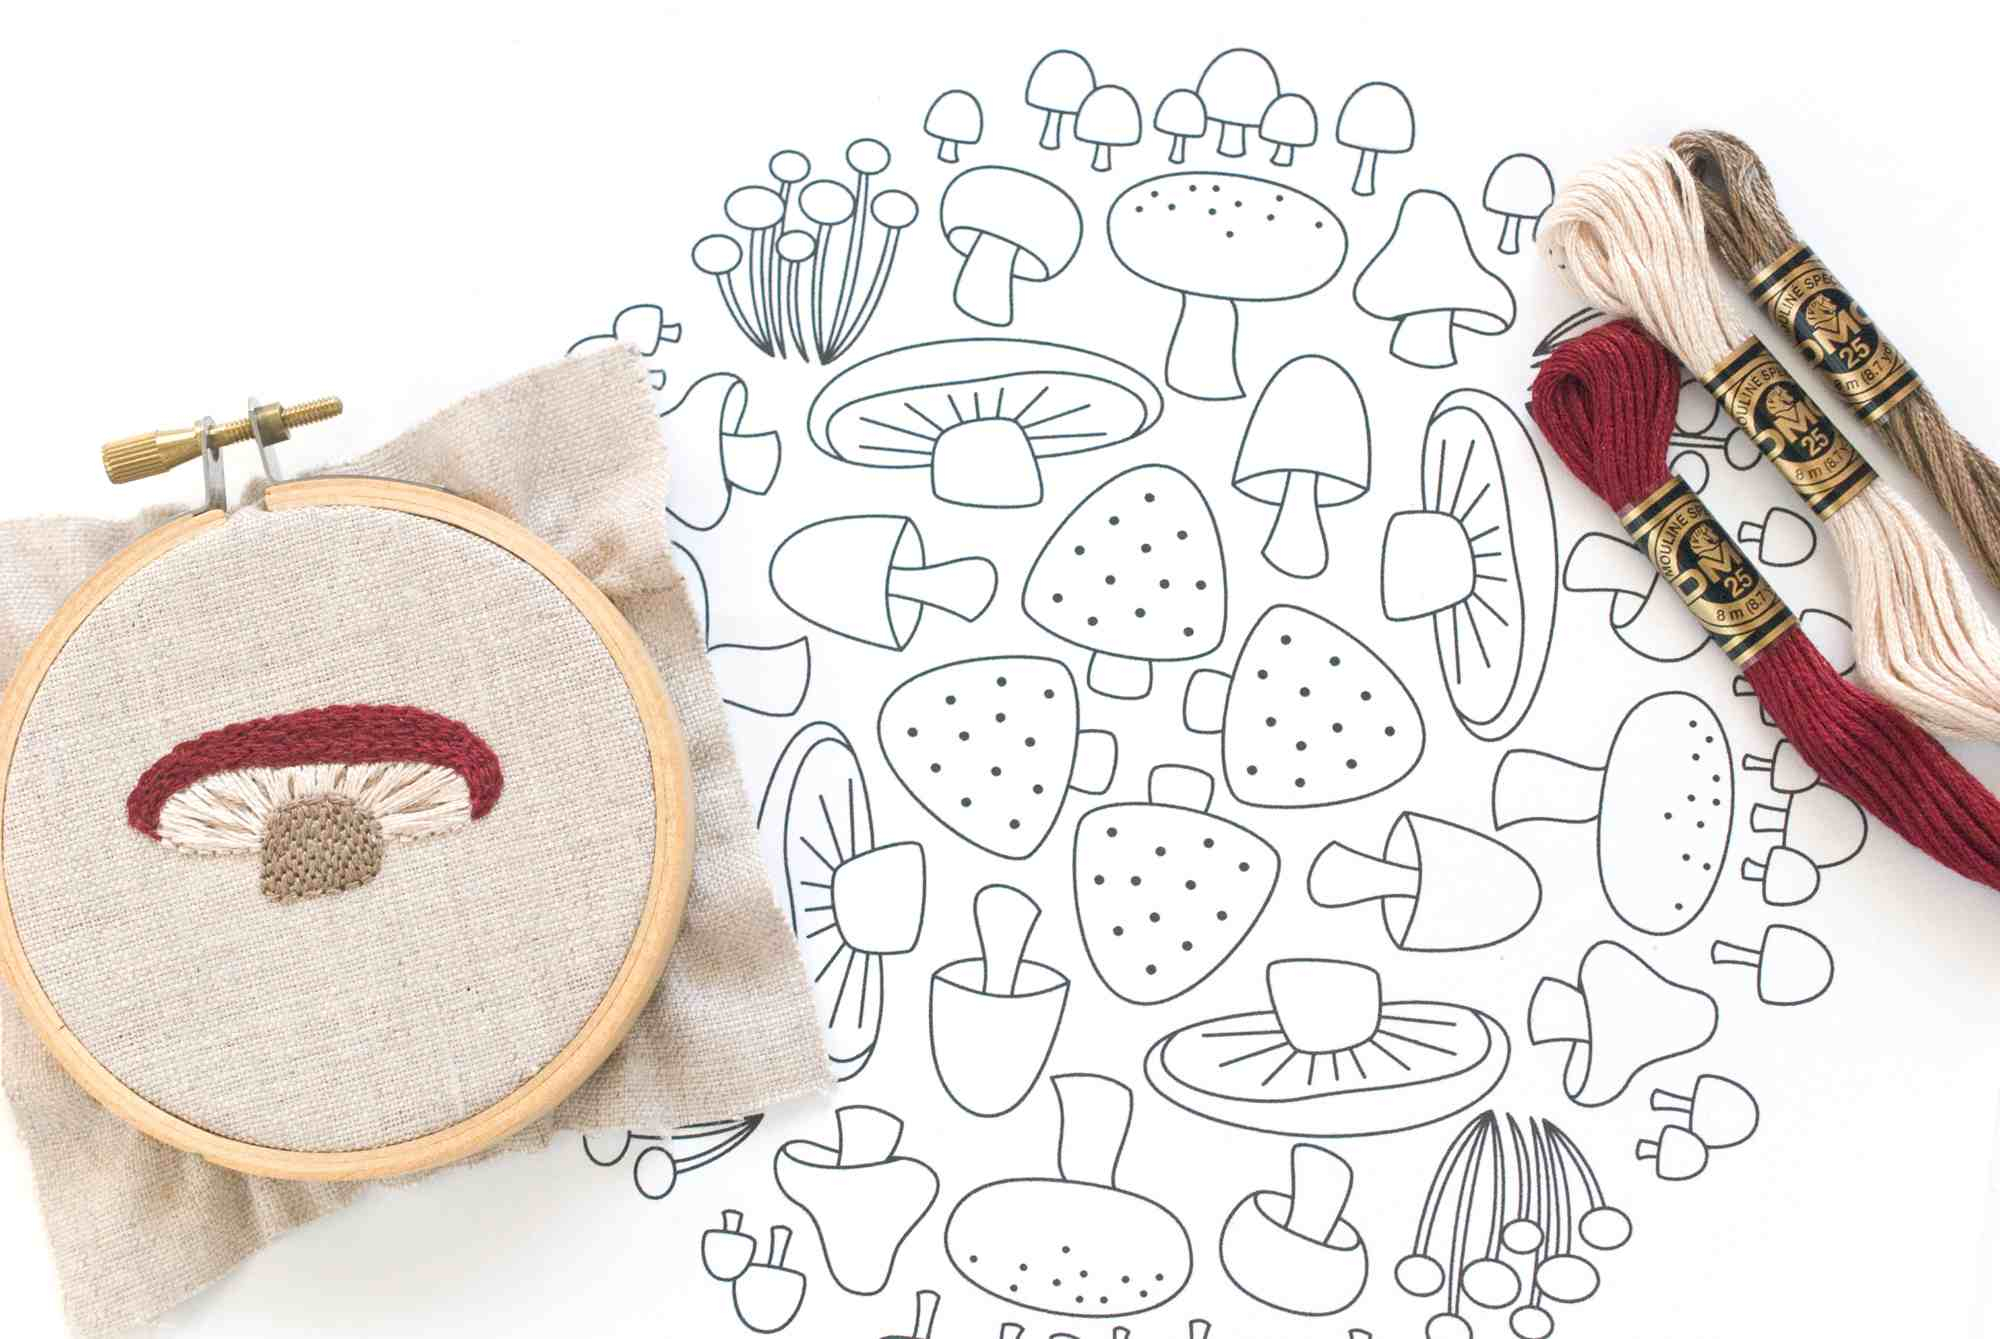 Free Embroidery Patterns Our Top 25 Free Embroidery Designs